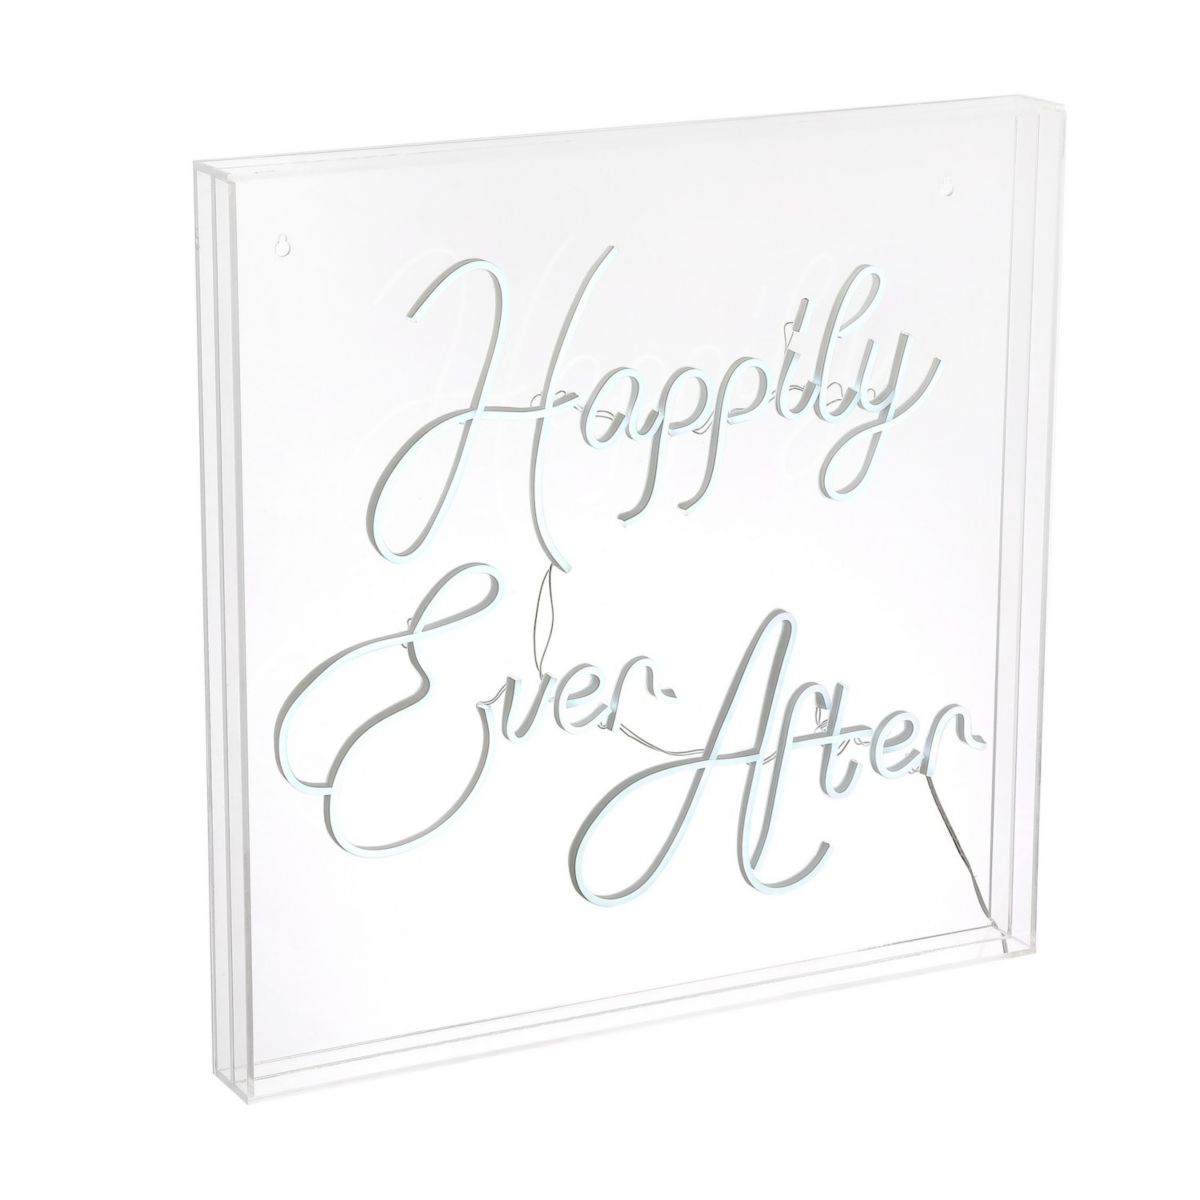 Happily Ever After Square Contemporary Glam Acrylic Box Usb Operated Led Neon Light Jonathan Y Designs